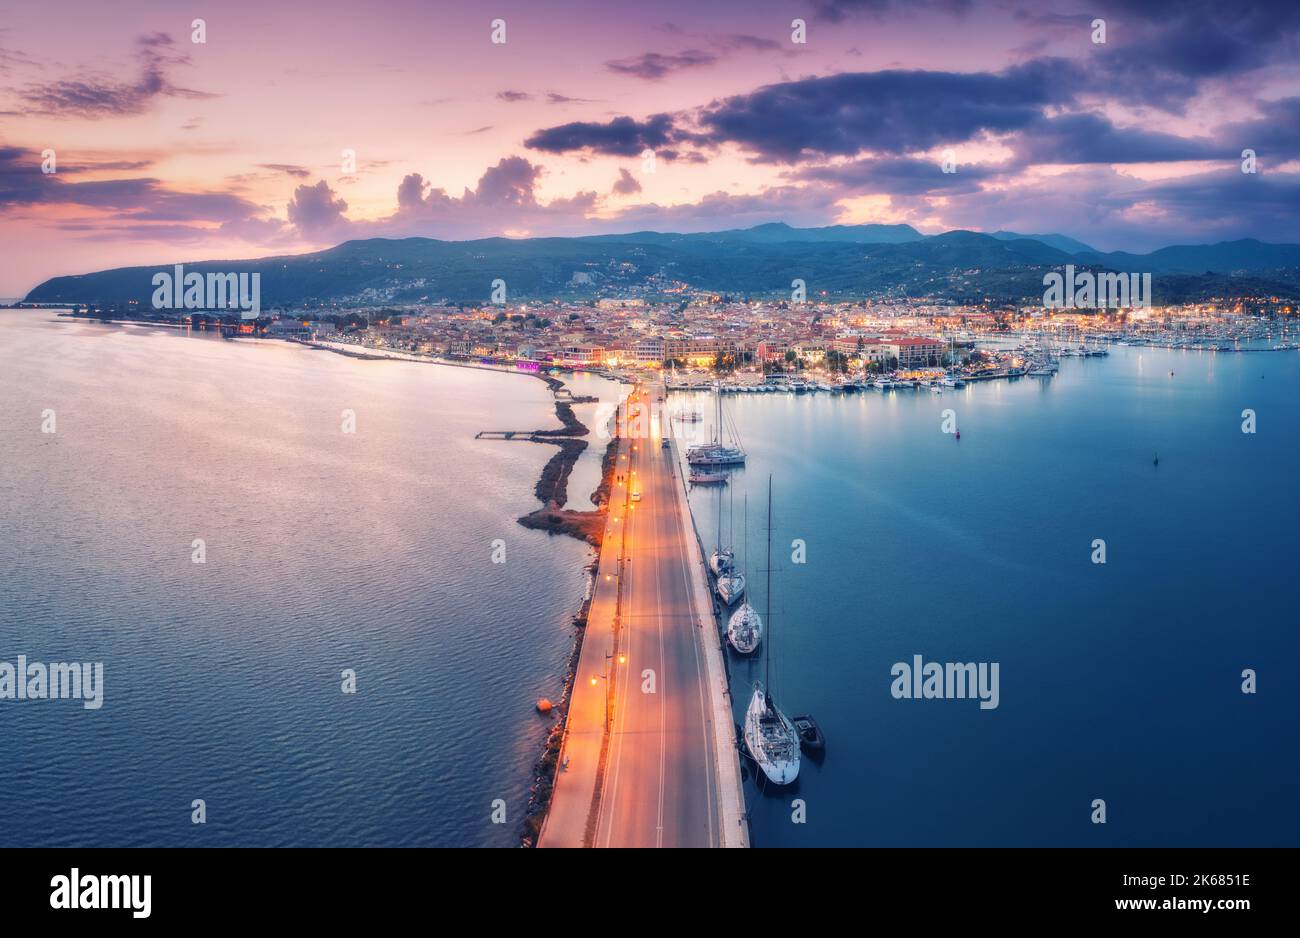 Aerial view of road and sea at night in Lefkada island, Greece Stock Photo